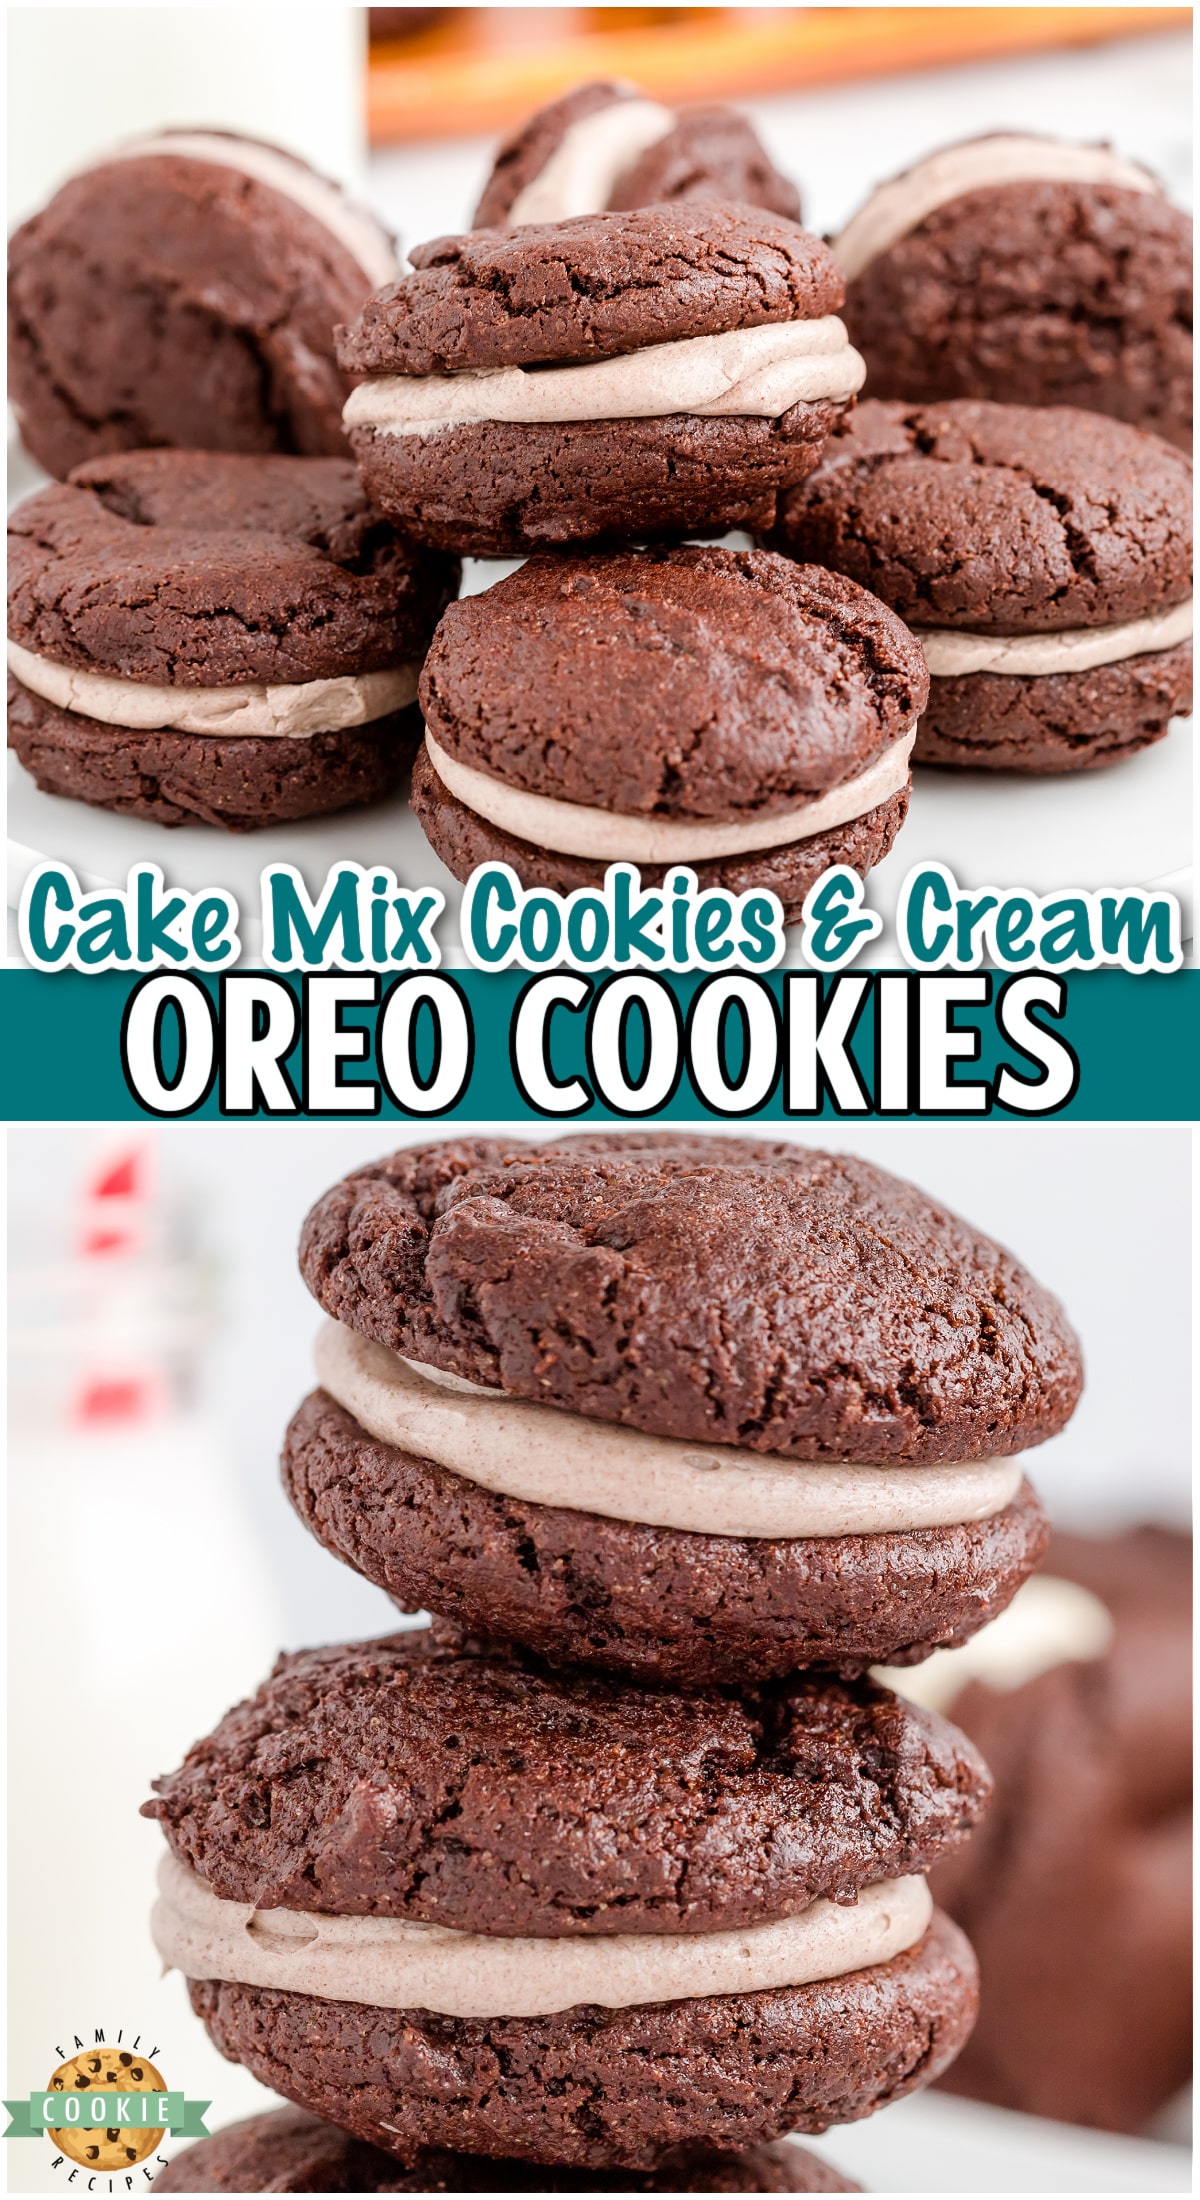 Homemade Cookies and Cream Oreo Cookies made easily with a chocolate cake mix! Soft cookies & cream filled chocolate sandwich cookies that everyone goes crazy over!